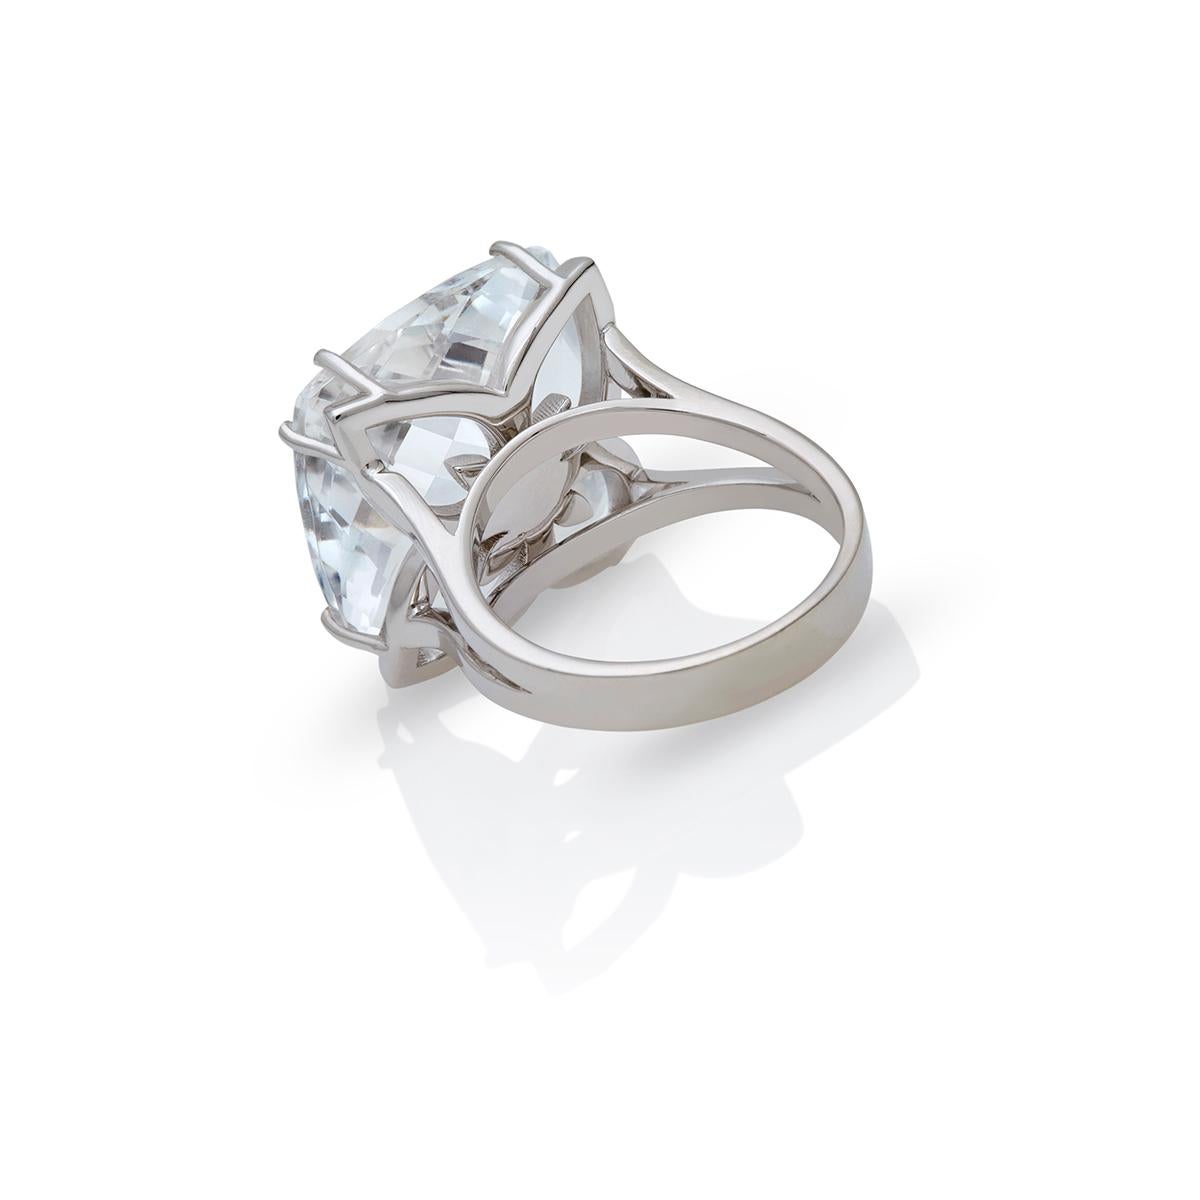 18kt White Gold Clear Royal Quartz ring 19.00 carat with Diamonds 0,08 ct Chakral Activator Ring by Nicofilimon.
An exquisite handcrafted 18kt white gold with a royal quartz cushion briolette cut & diamonds ring that defines elegance and refined